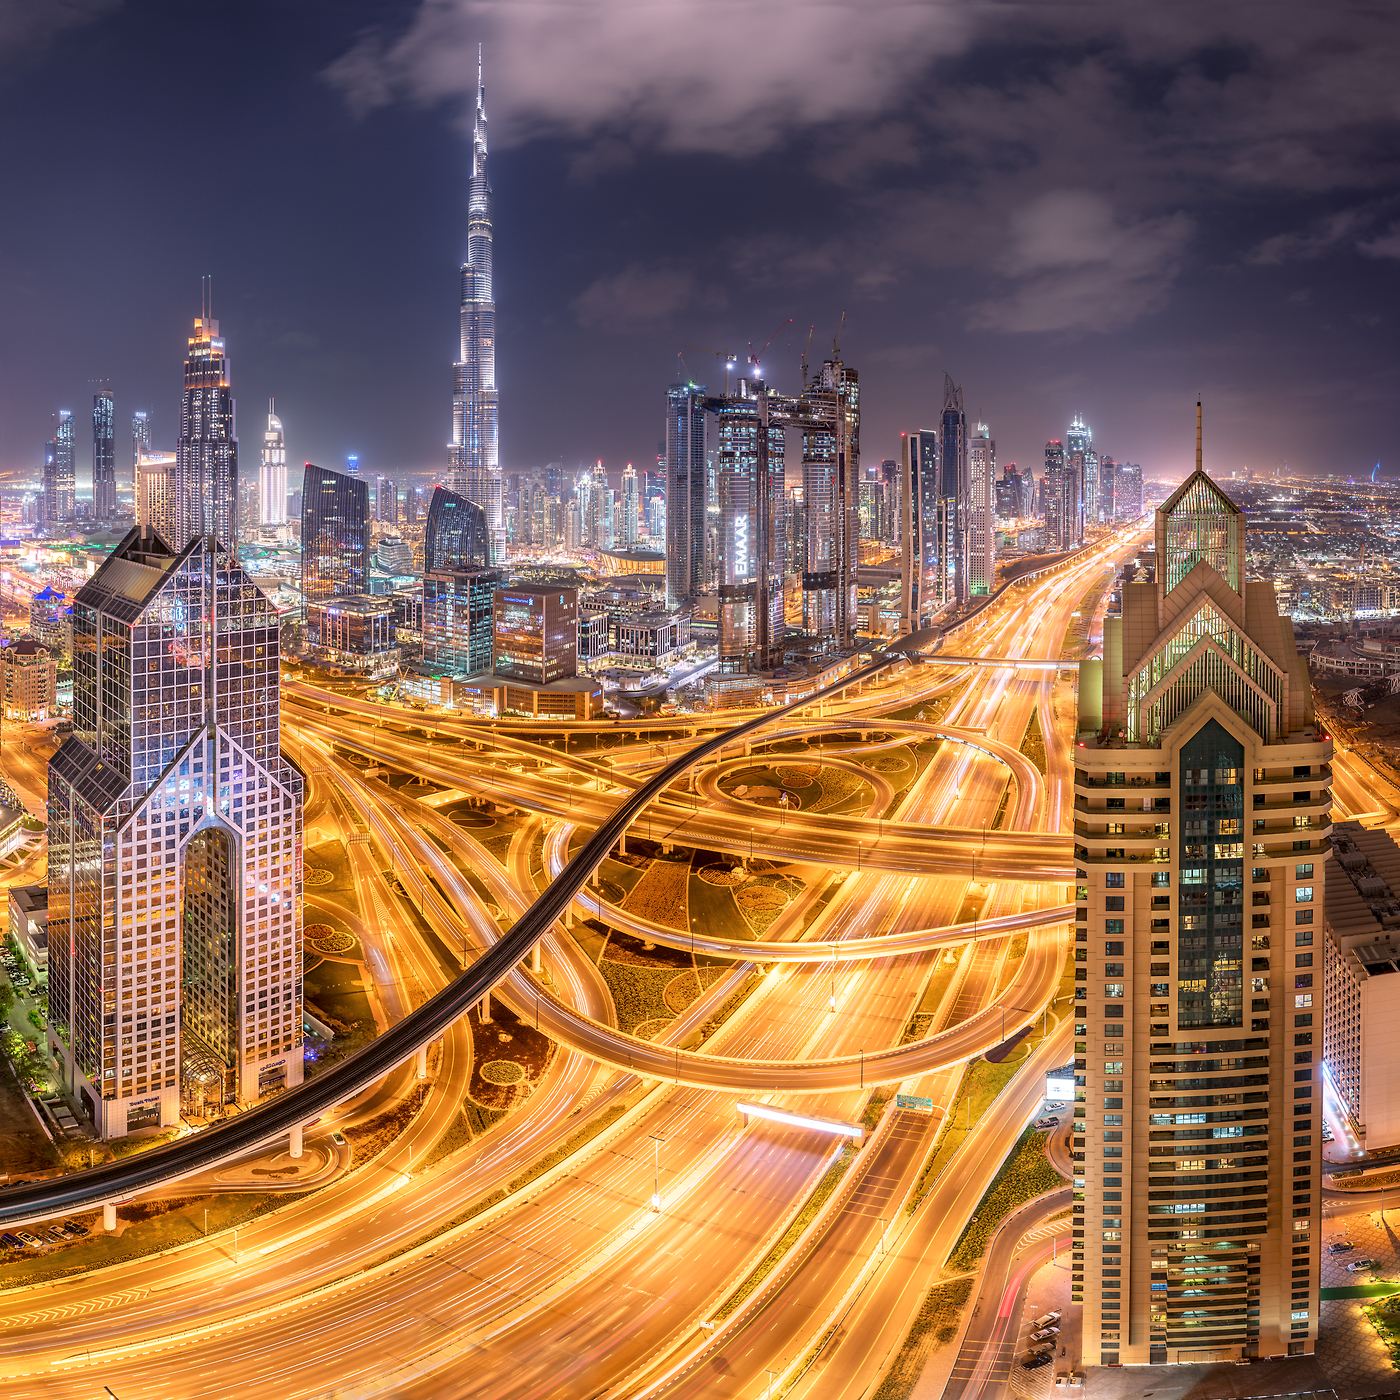 378 megapixels! A very high resolution, large-format nighttime photo of the Dubai skyline and highways with the Burj Khalifa; fine art cityscape photograph created by Tim Shields in the United Arab Emirates.